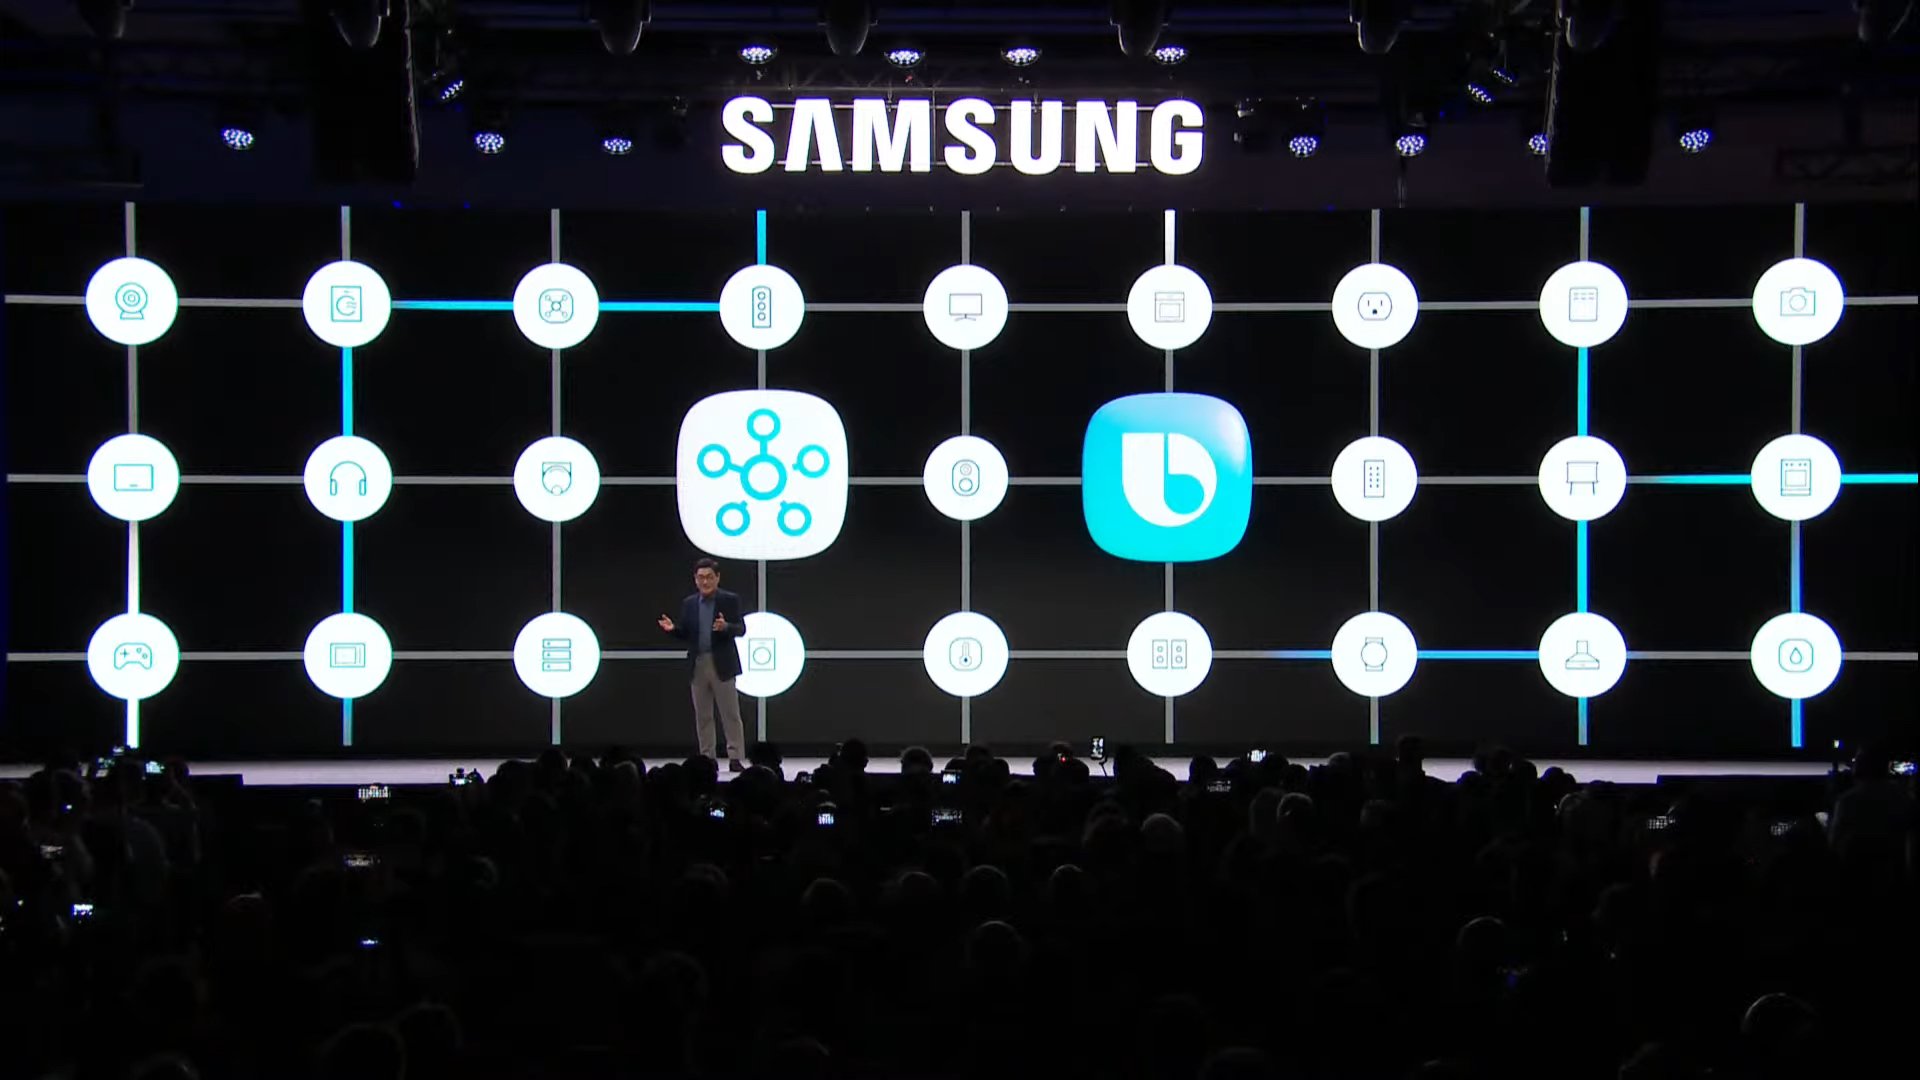 Samsung could launch advanced version of SmartThings platform